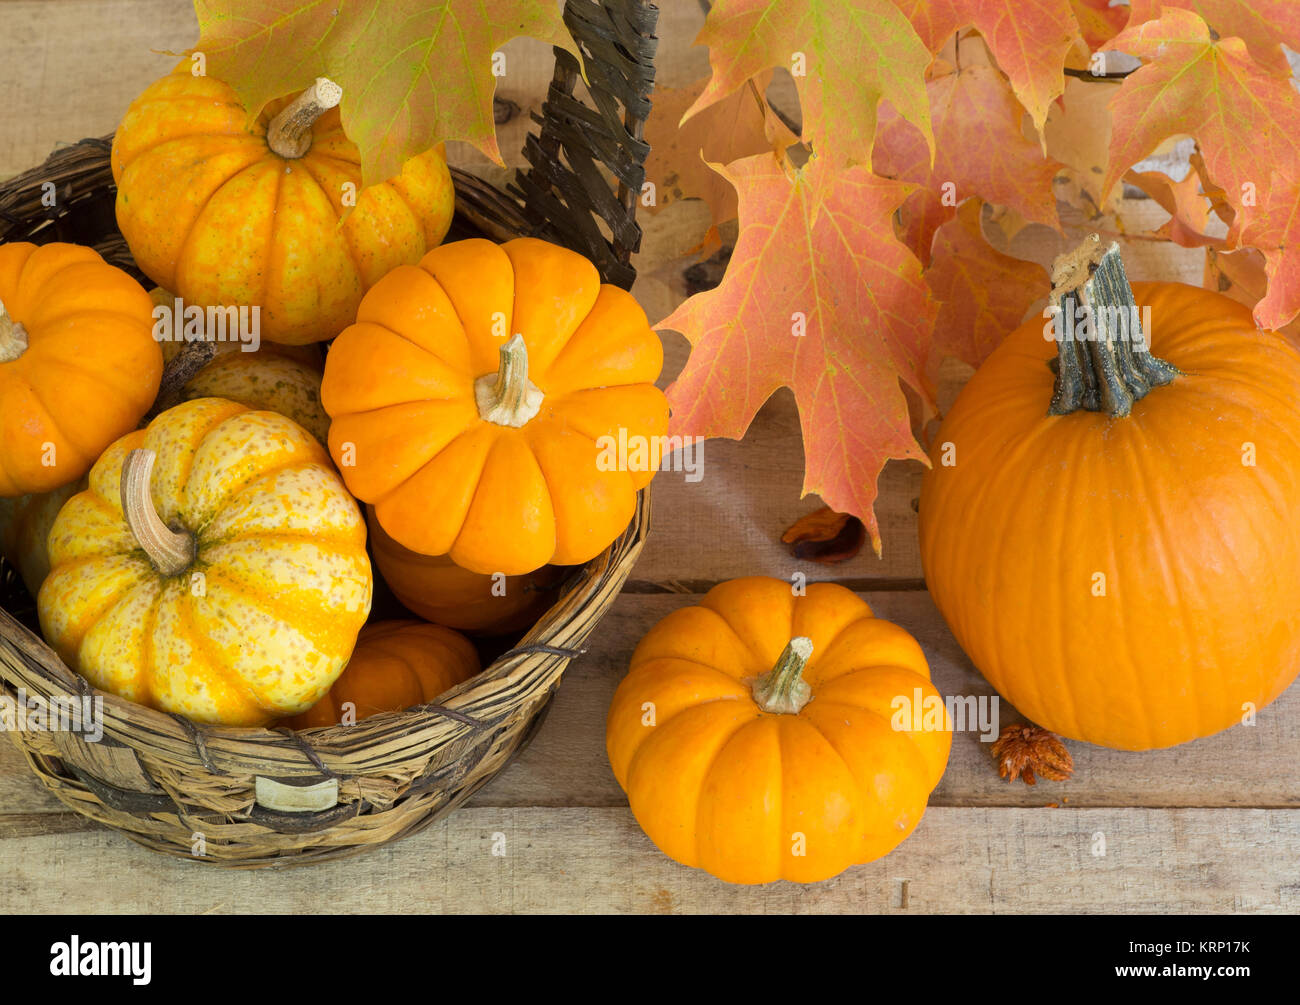 Pumpkins and gourds with colorful fall leaves Stock Photo